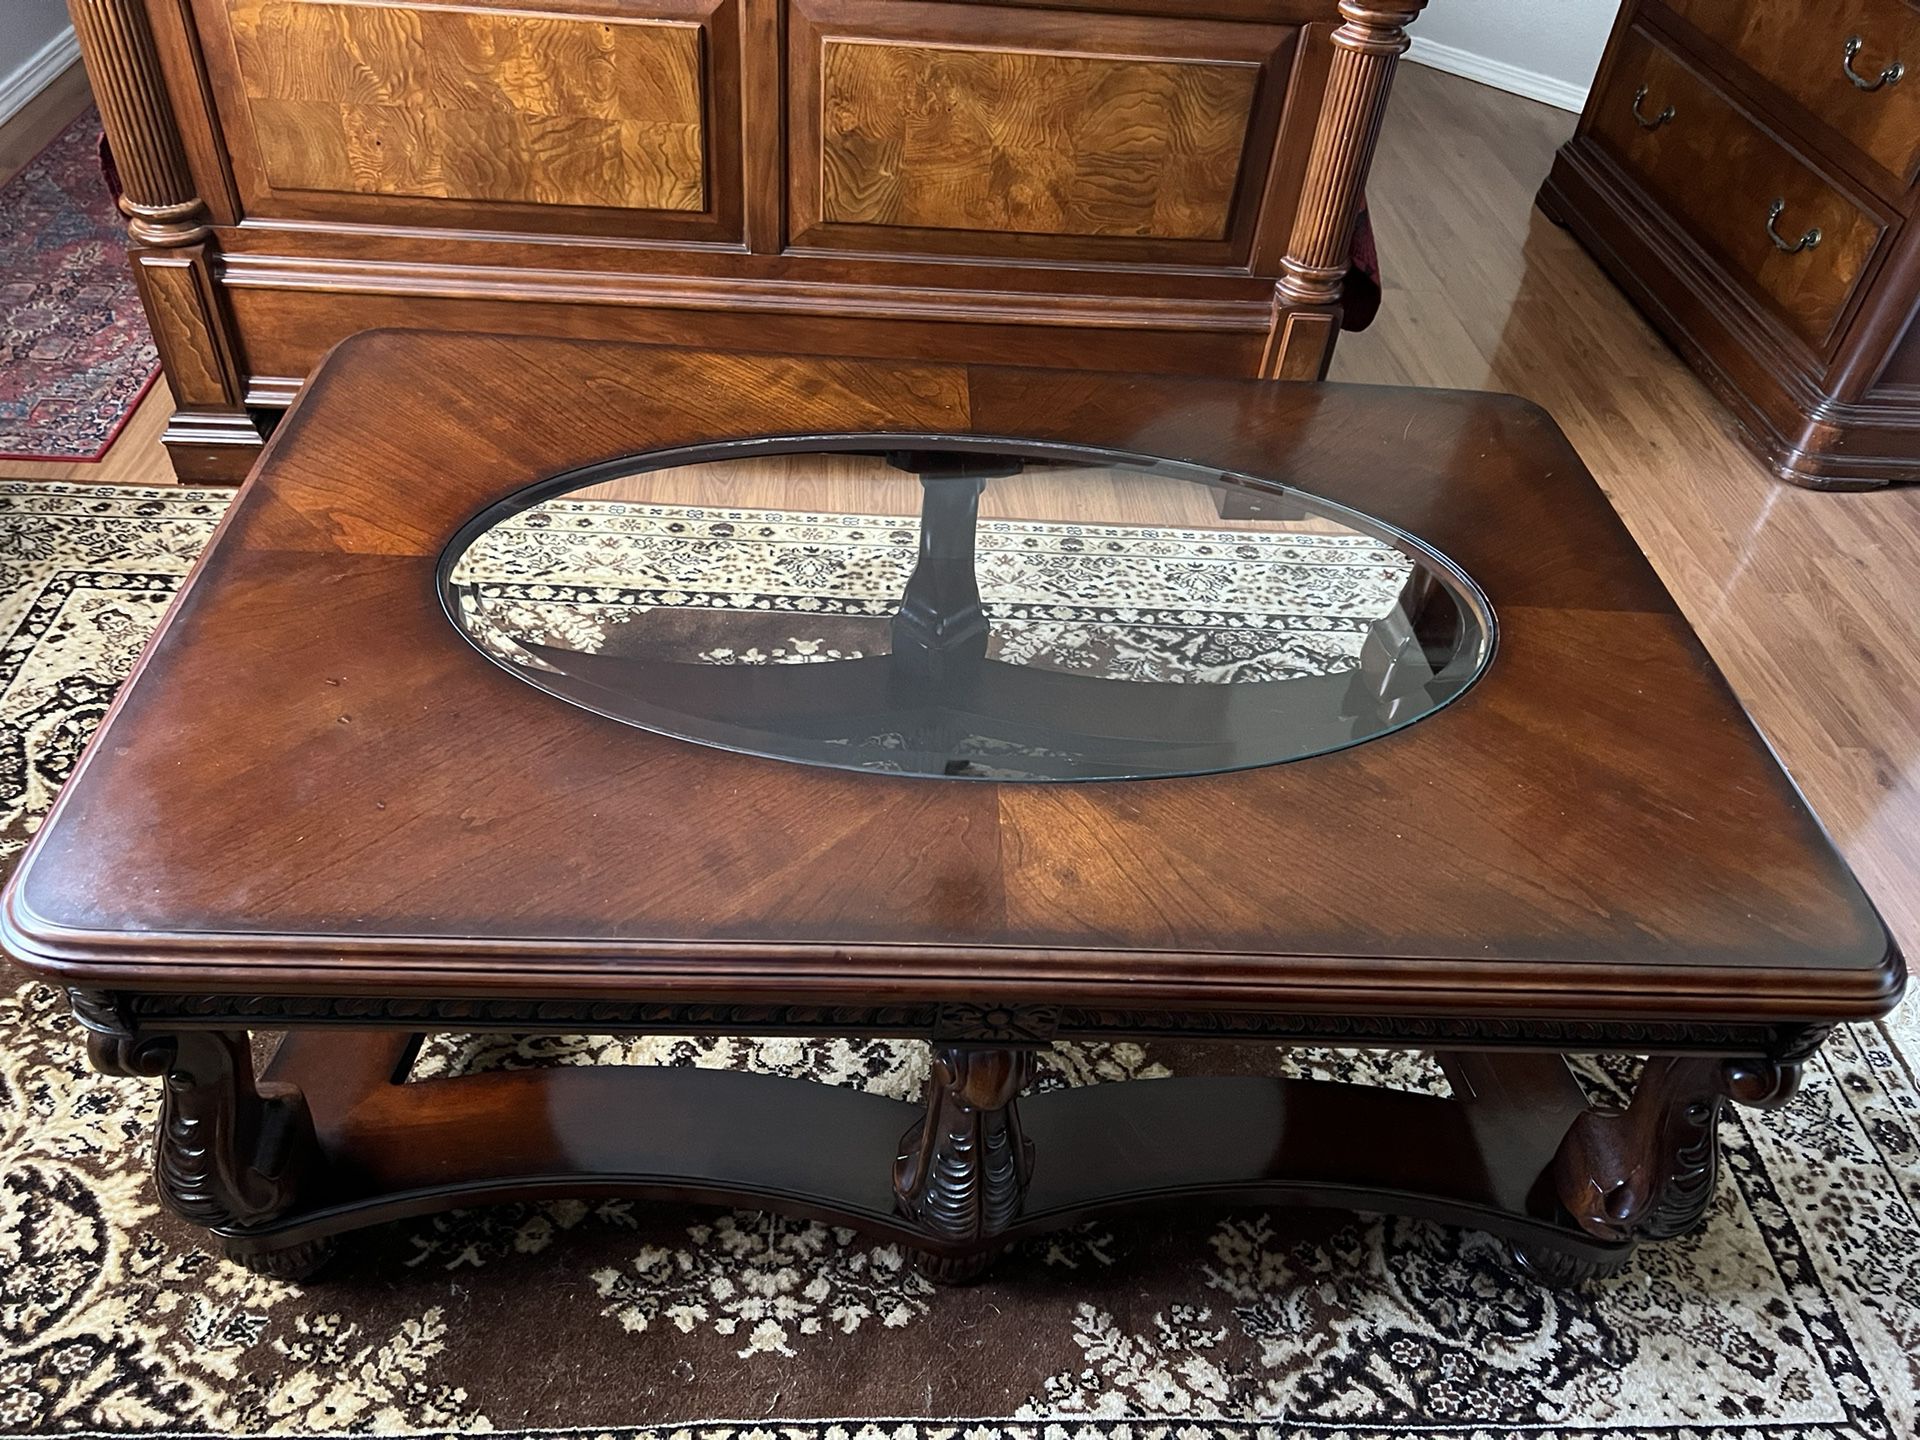 Solid Chery Wood Finished Coffee Table w/ Glass Insert